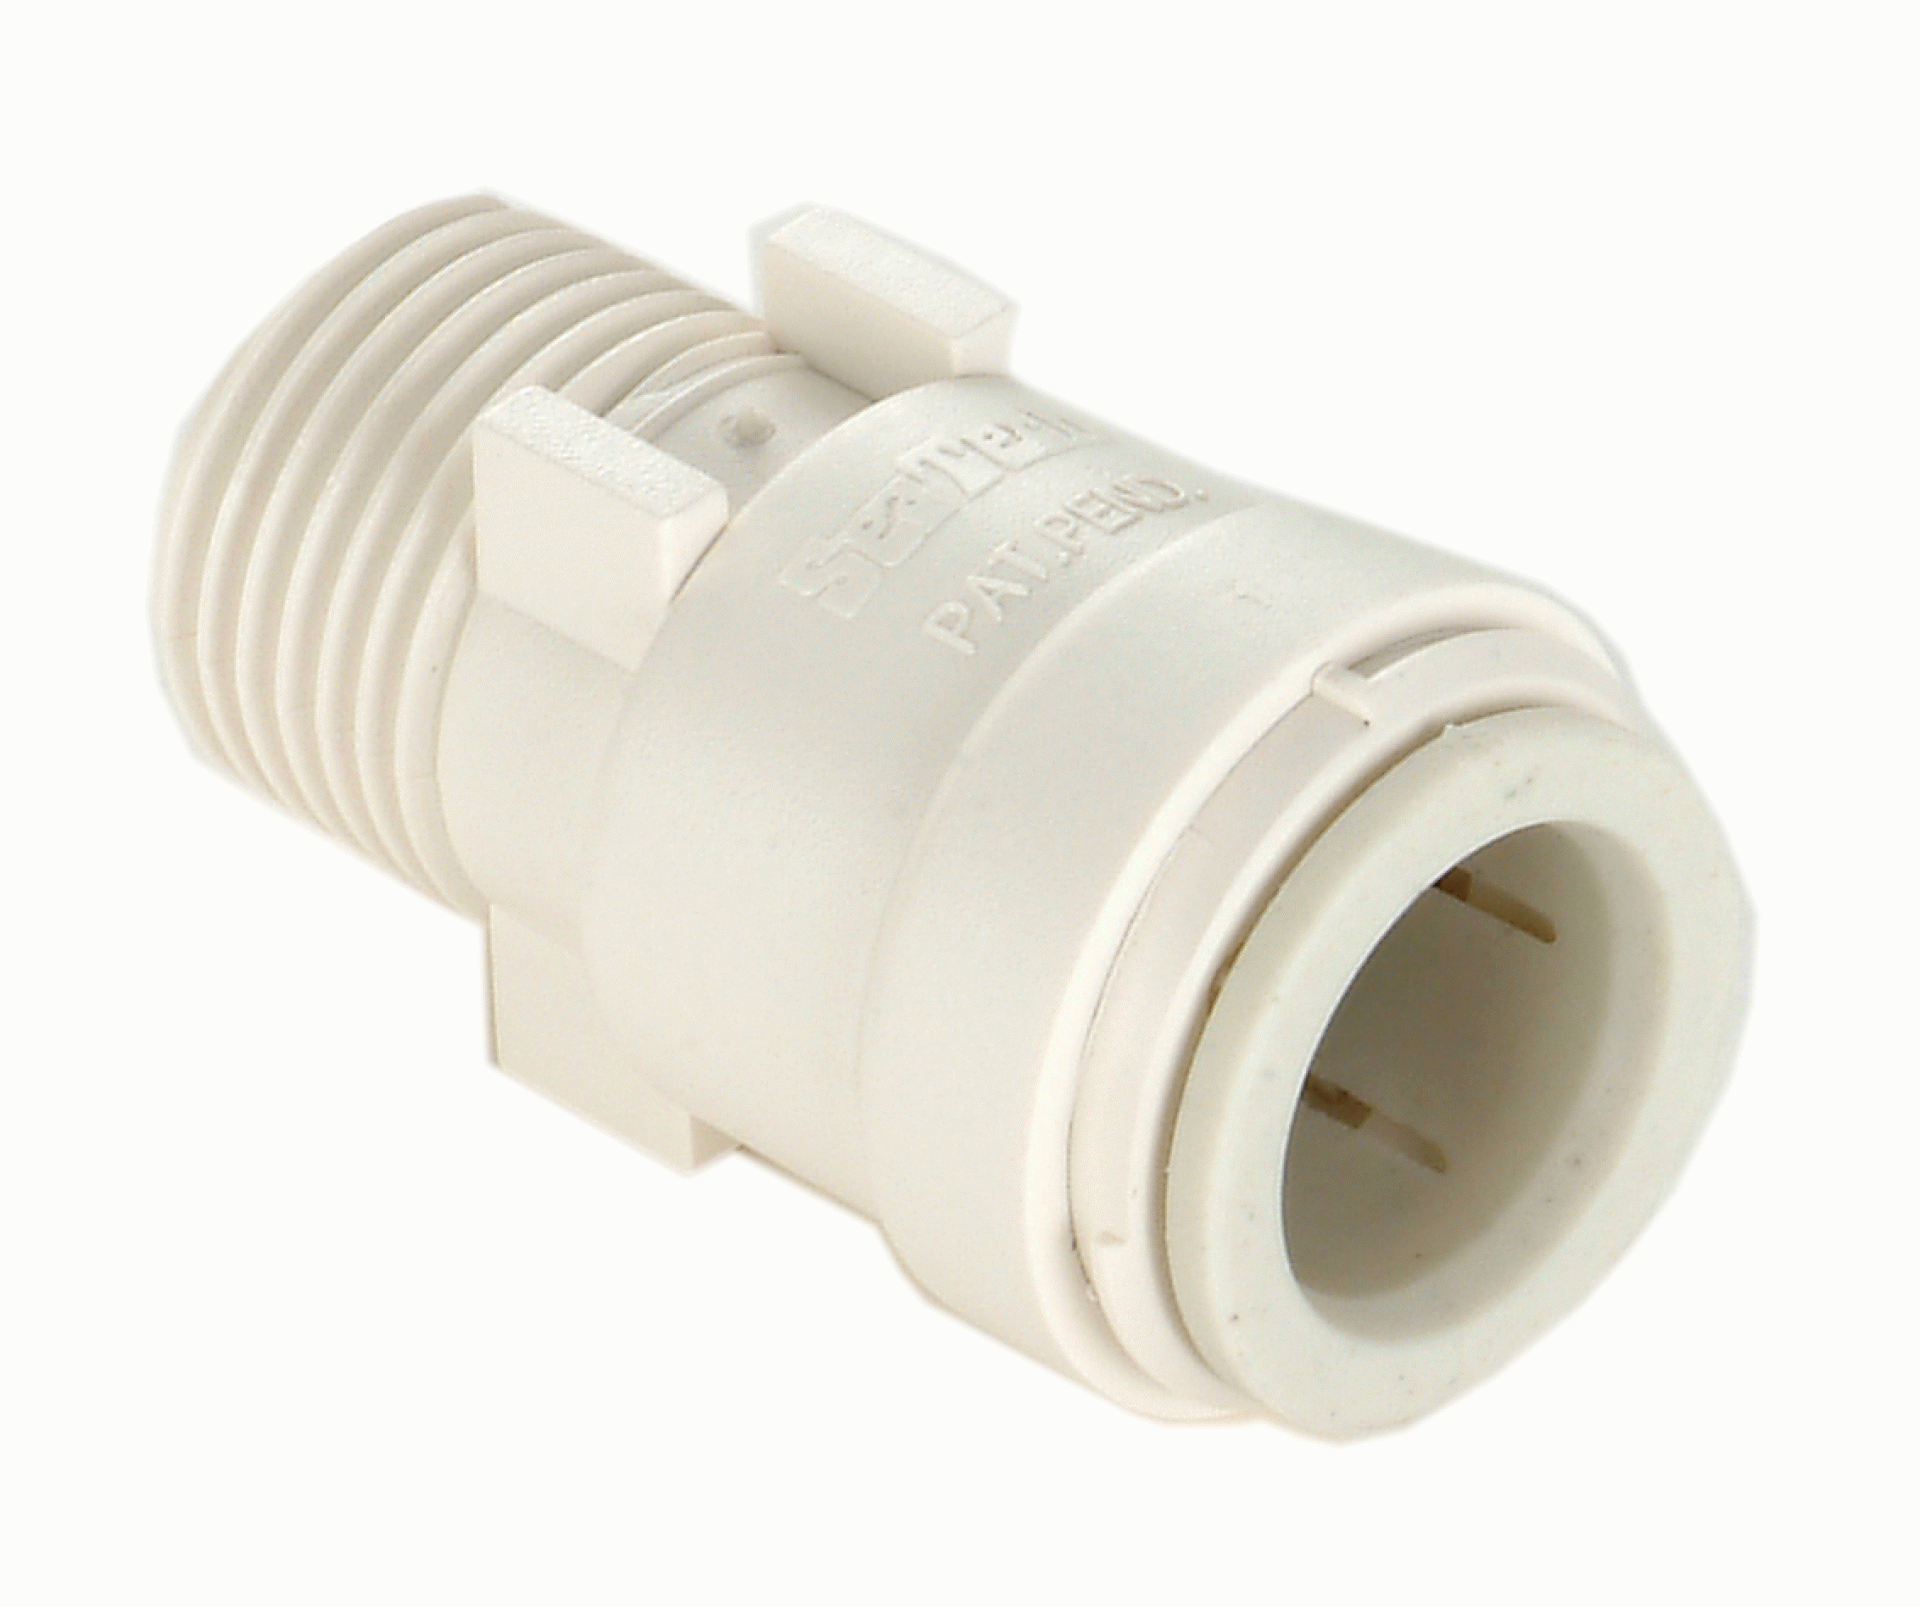 SEA TECH | 0959290 | Male Connector 1/2" CTS x 3/4" MGHT